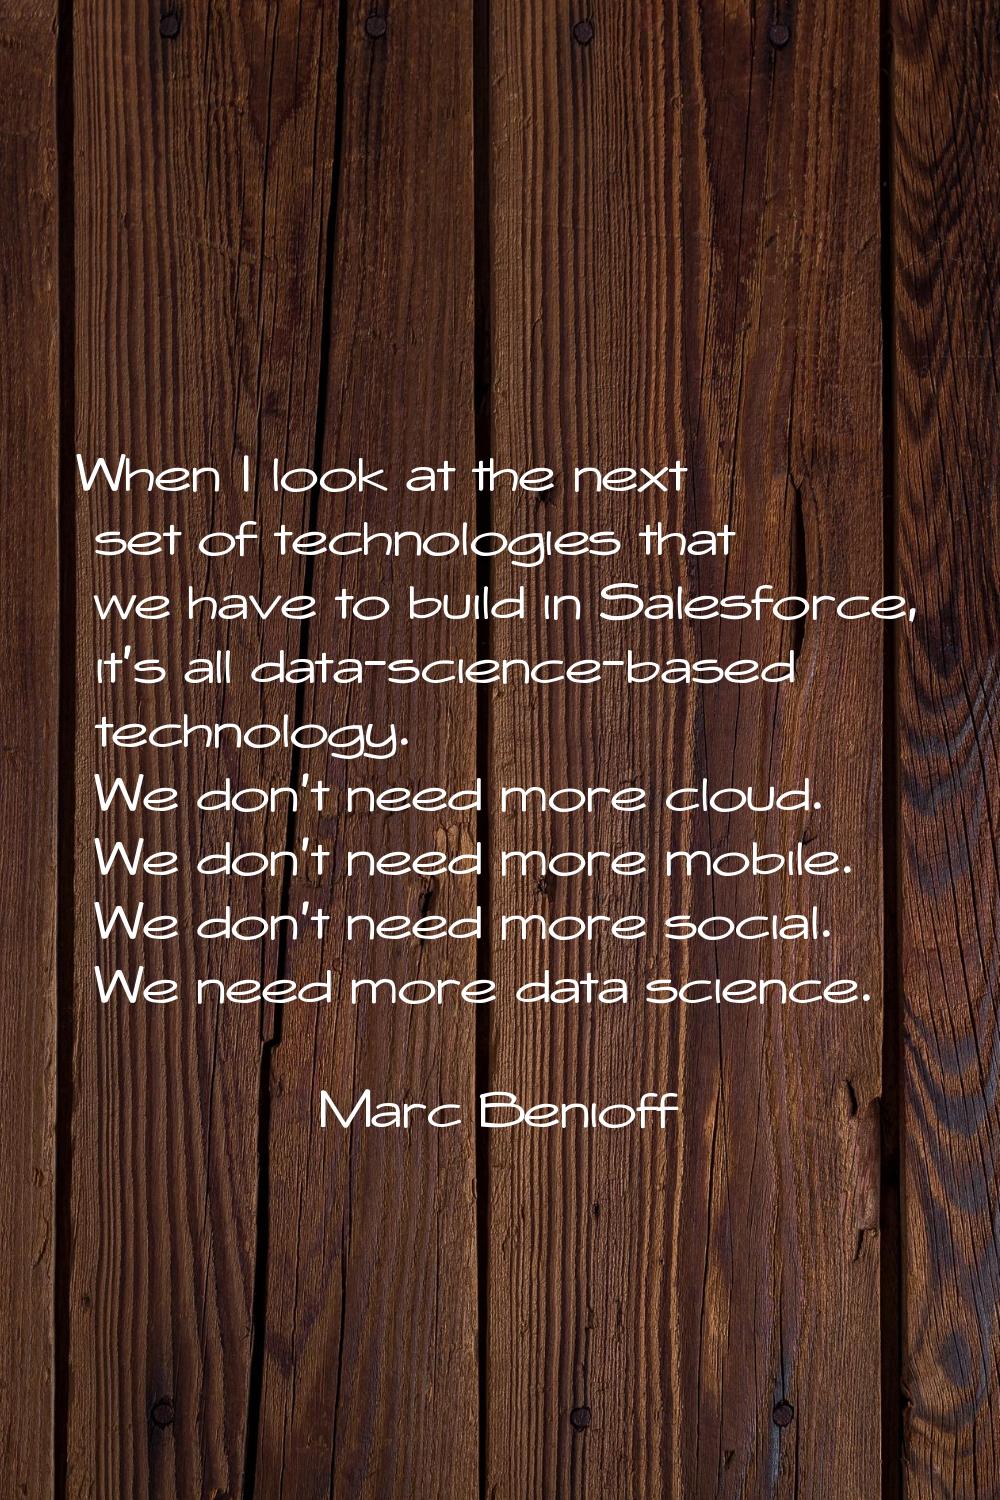 When I look at the next set of technologies that we have to build in Salesforce, it's all data-scie